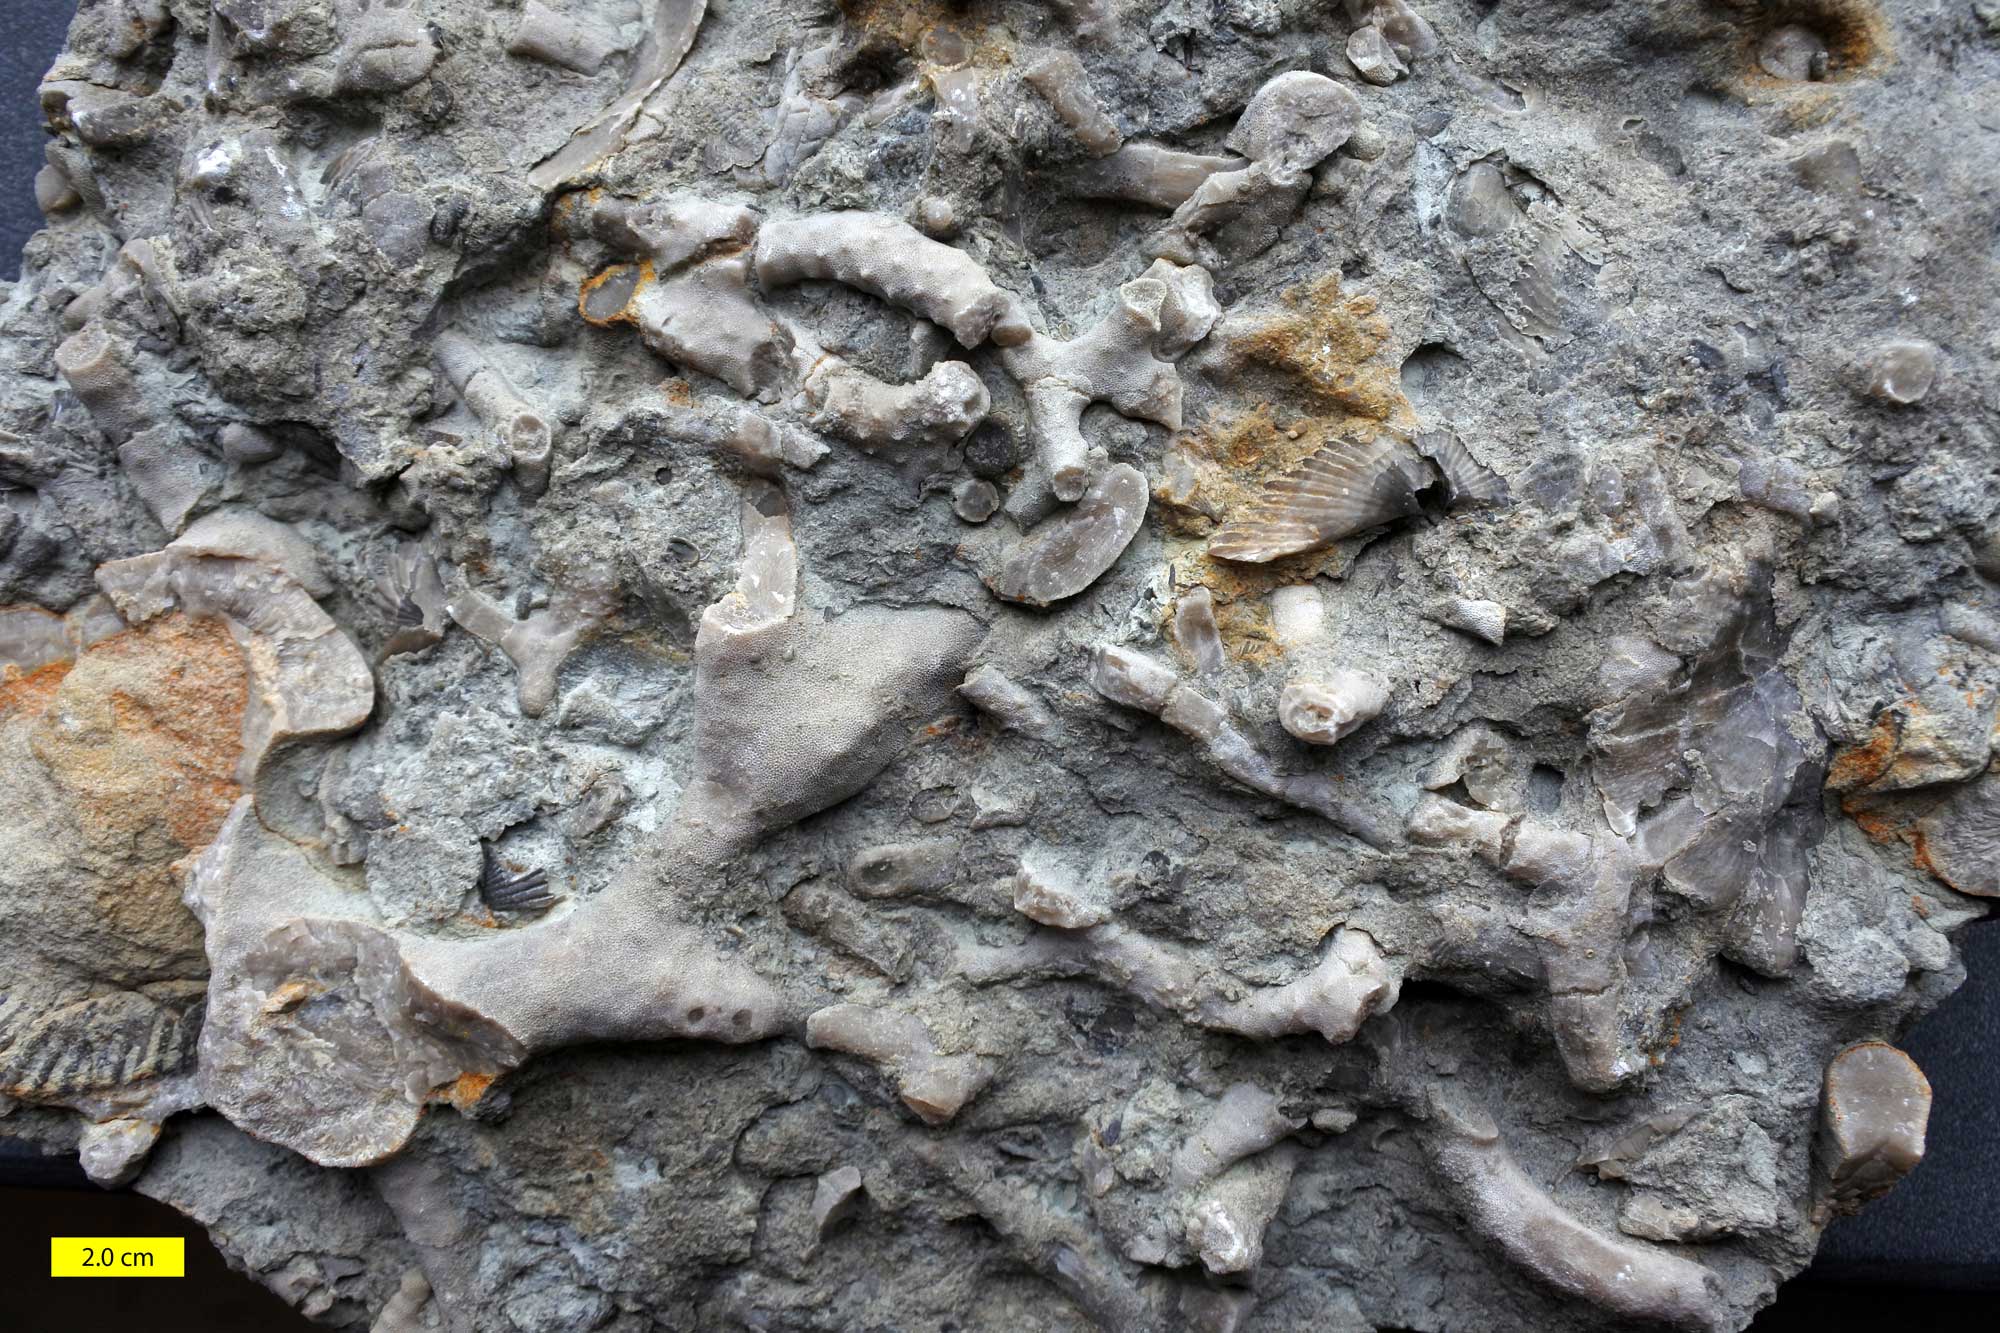 Photograph of bryozoans from the Ordovician of Indiana. The photo shows branching bryozoans preserved in a gray rock matrix. Some bits of branchiopod shell can be seen around the bryozoans.